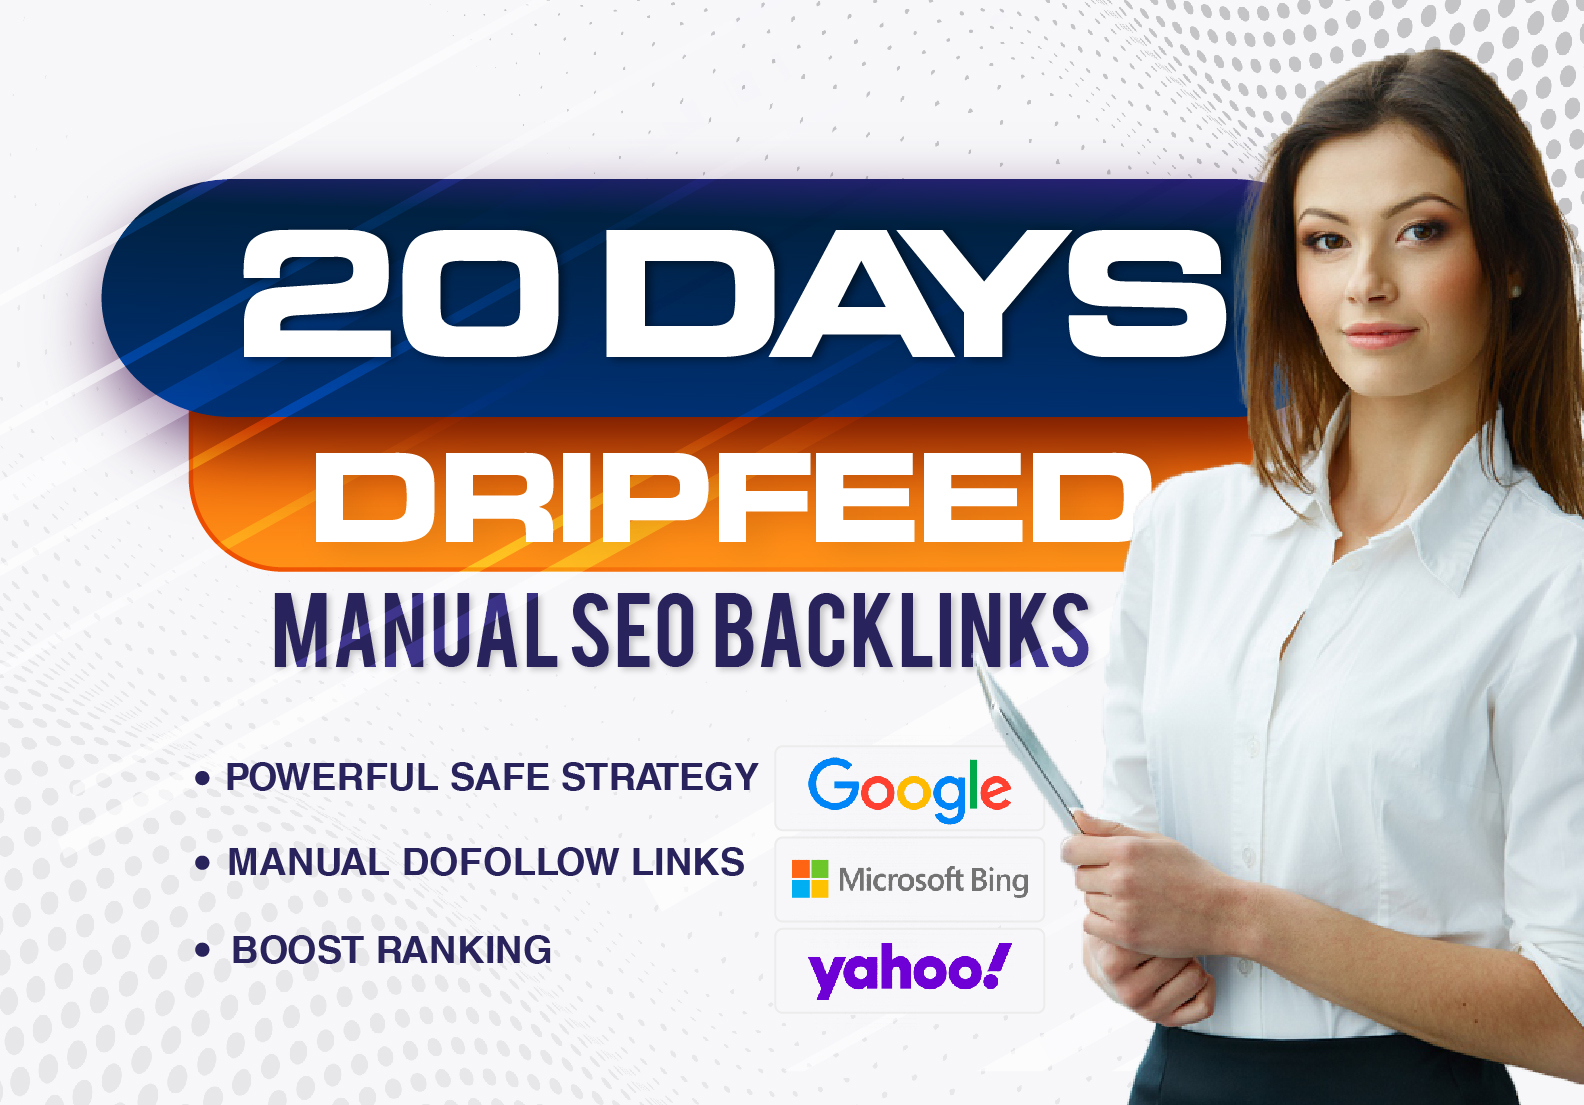 Build Your Way to Google's Top: 20-Day SEO Backlinks to Boost Rankings